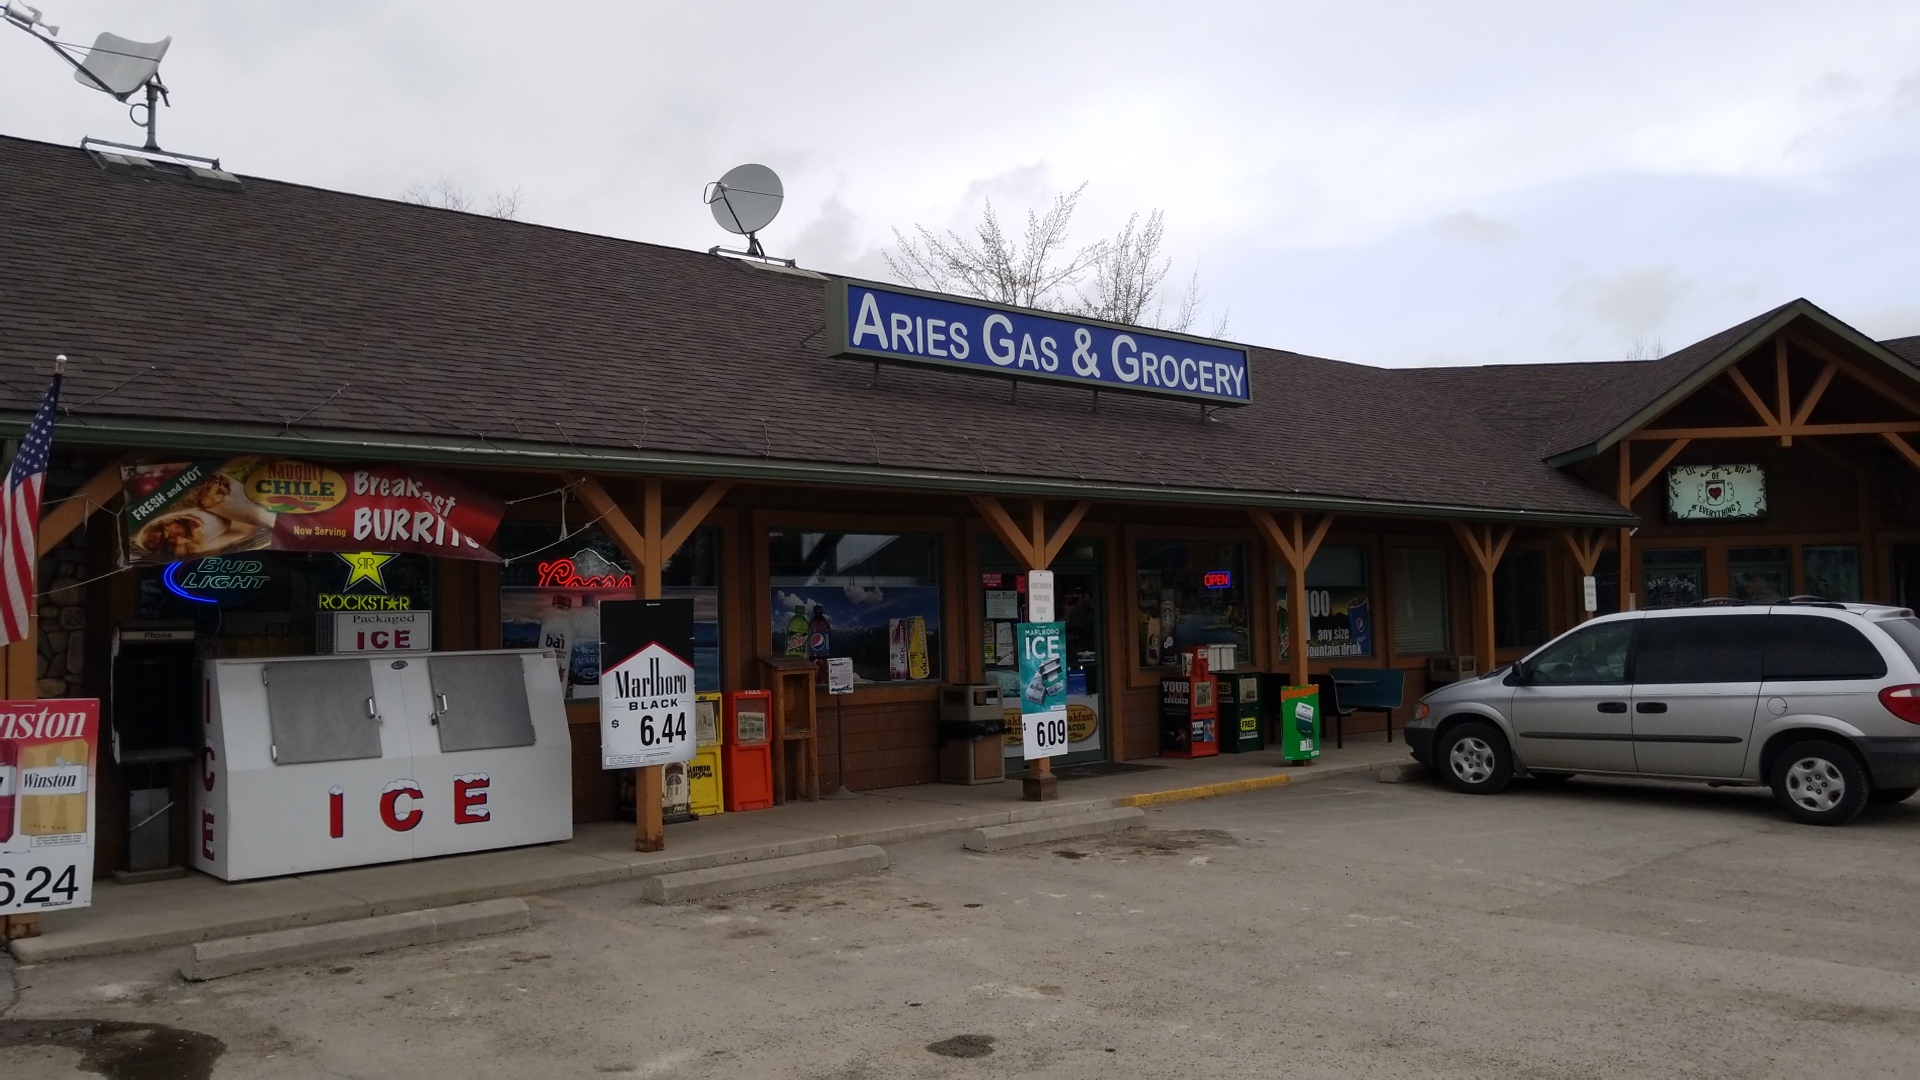 Aries Gas & Grocery